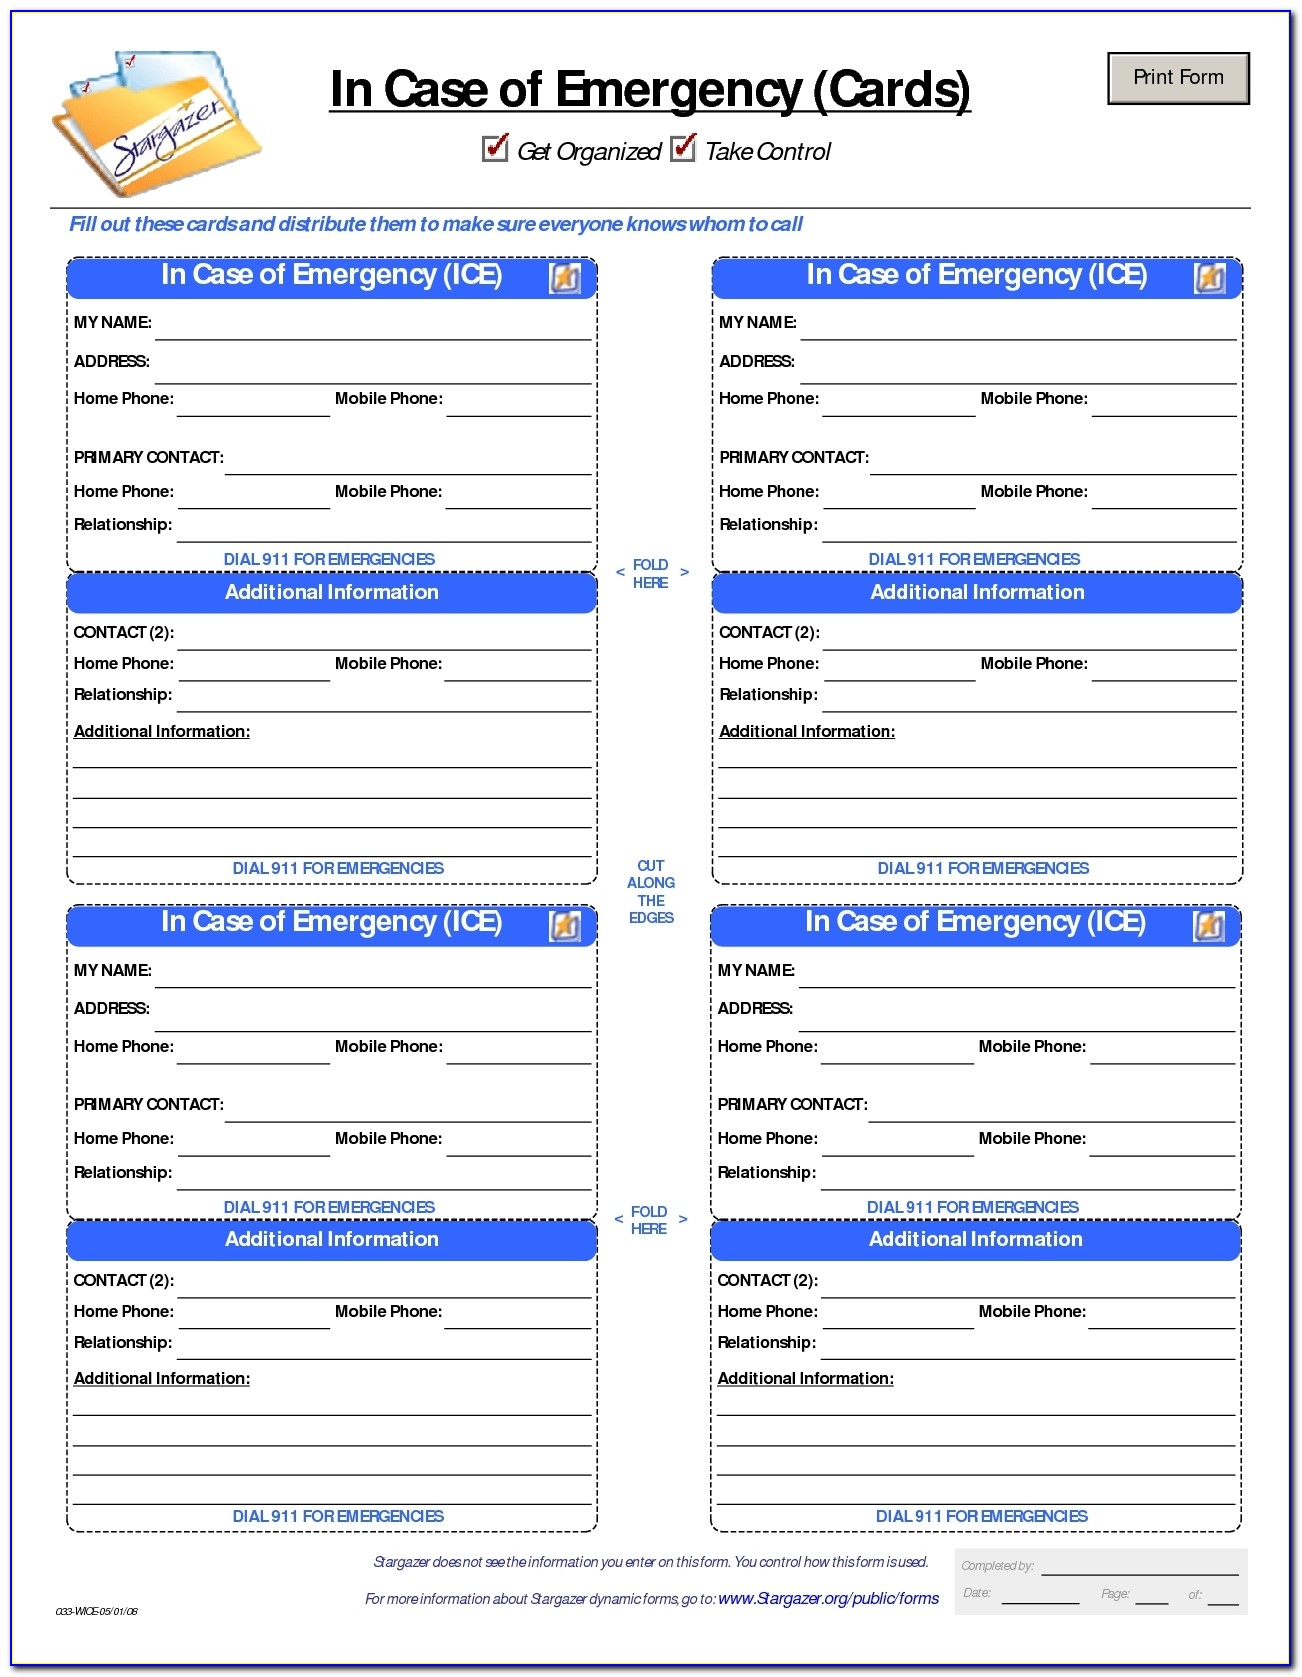 Id Card Template | In Case Of Emergency Cards | Pinterest | Cases With Emergency Card Template